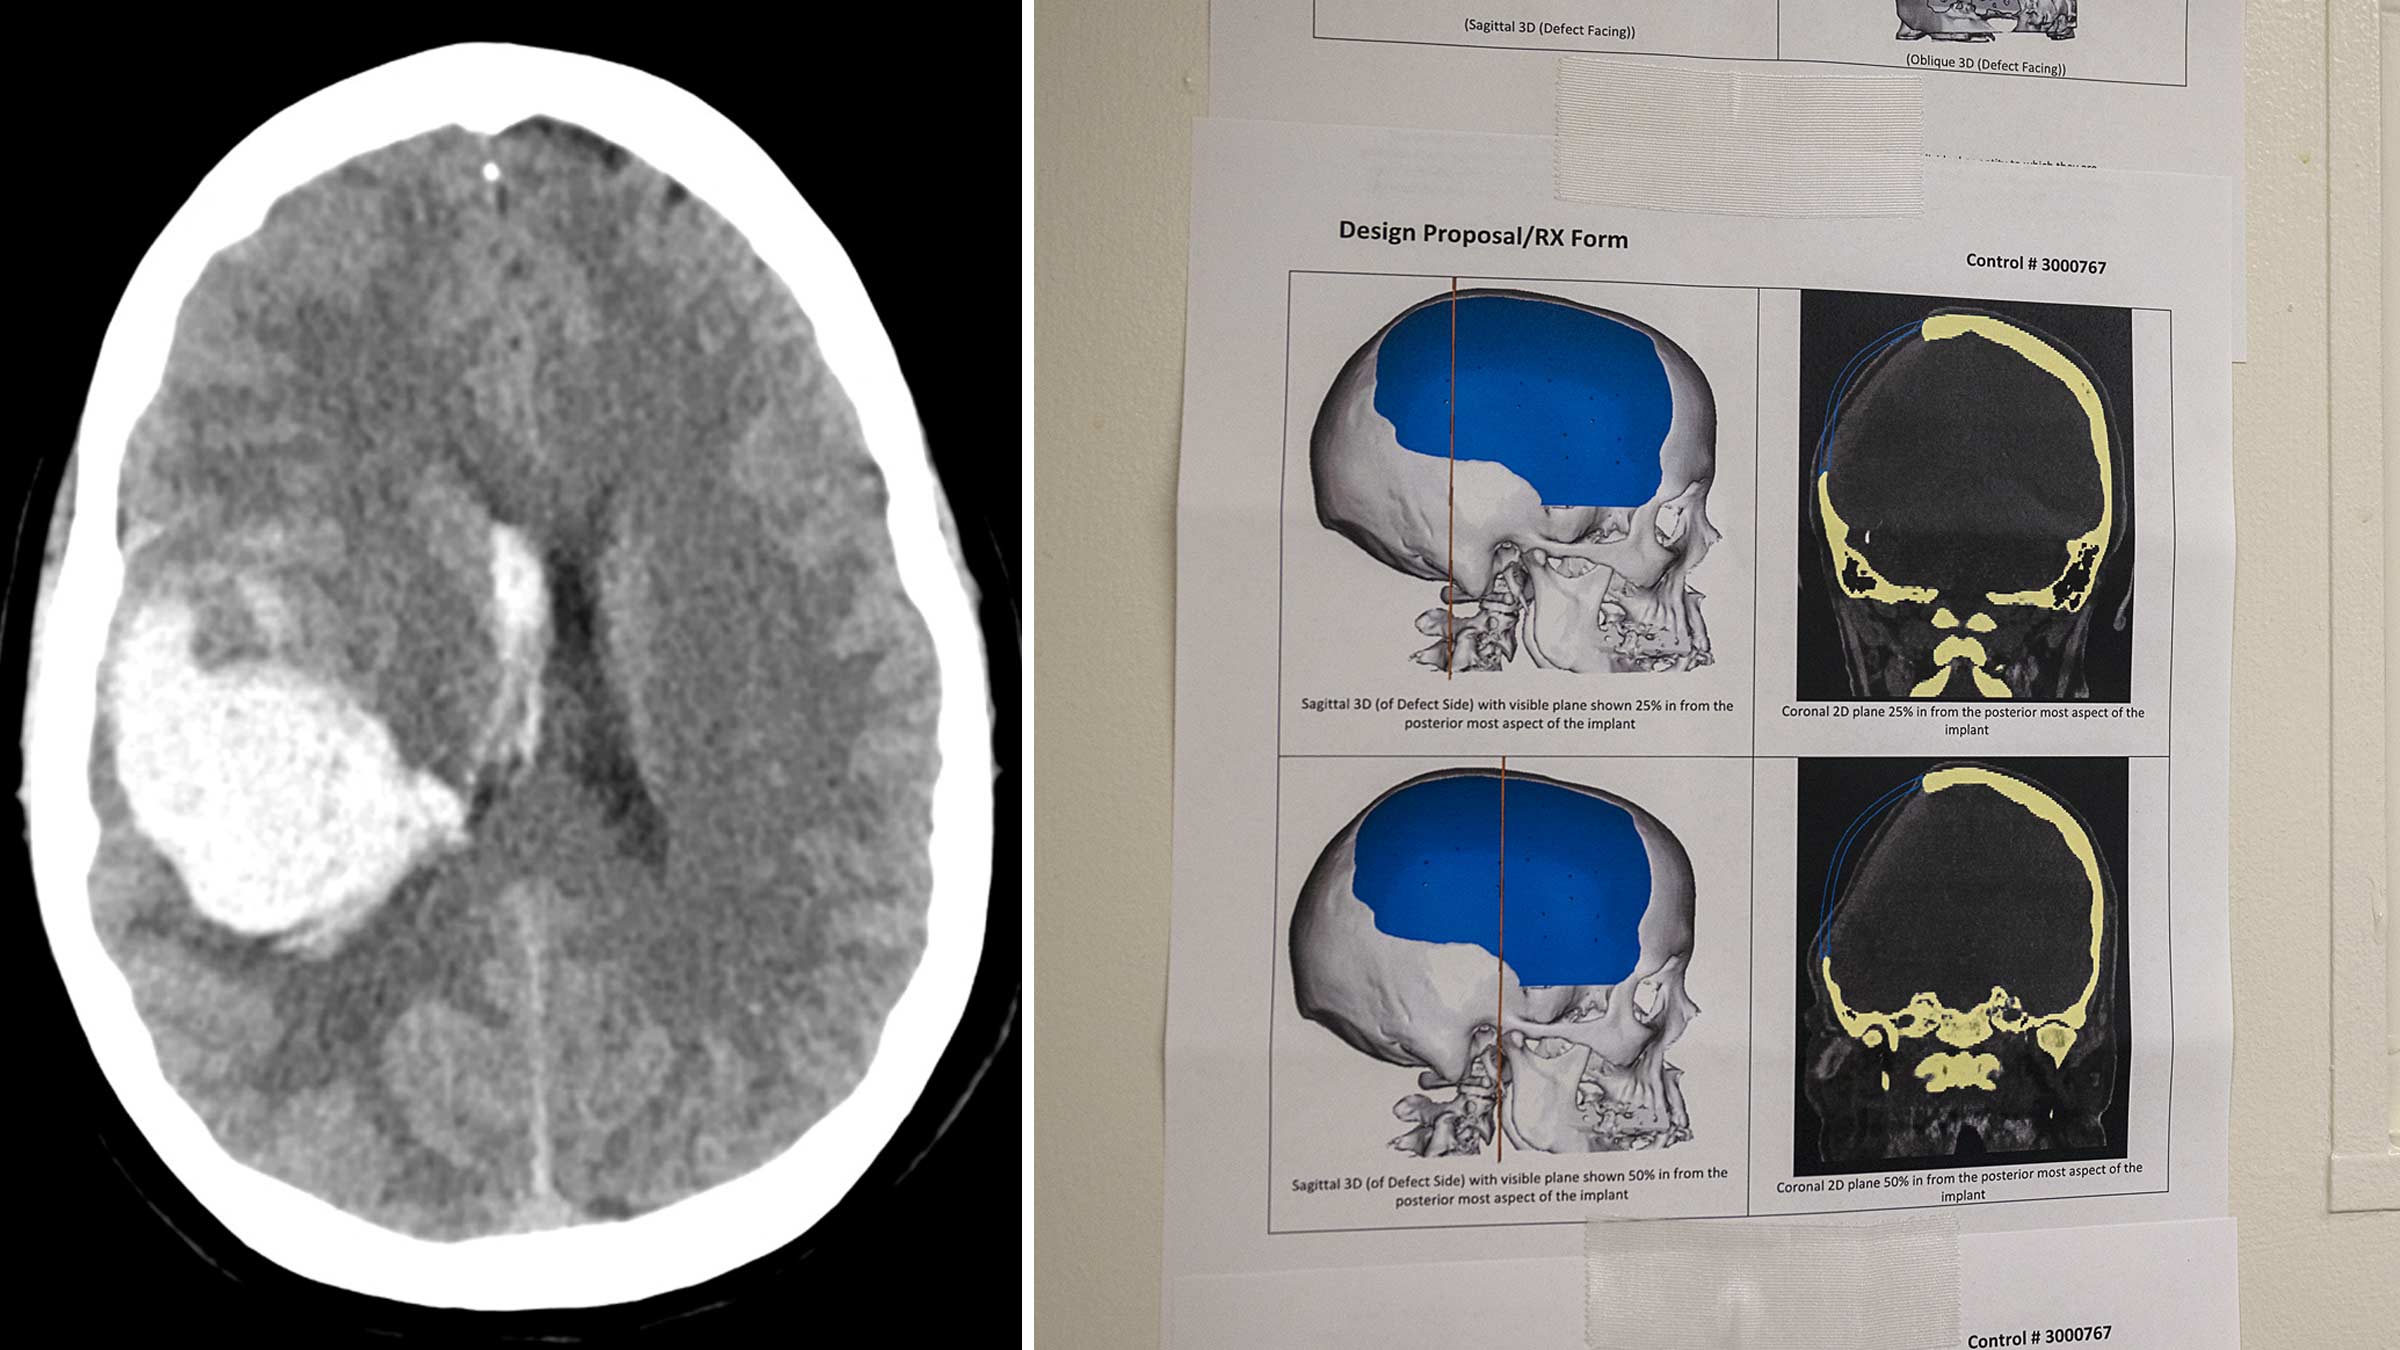 A collage of two images: Dr. Mitchell’s plan for a patient’s cranioplasty, and a patient's brain scan showing damage from a brain bleed